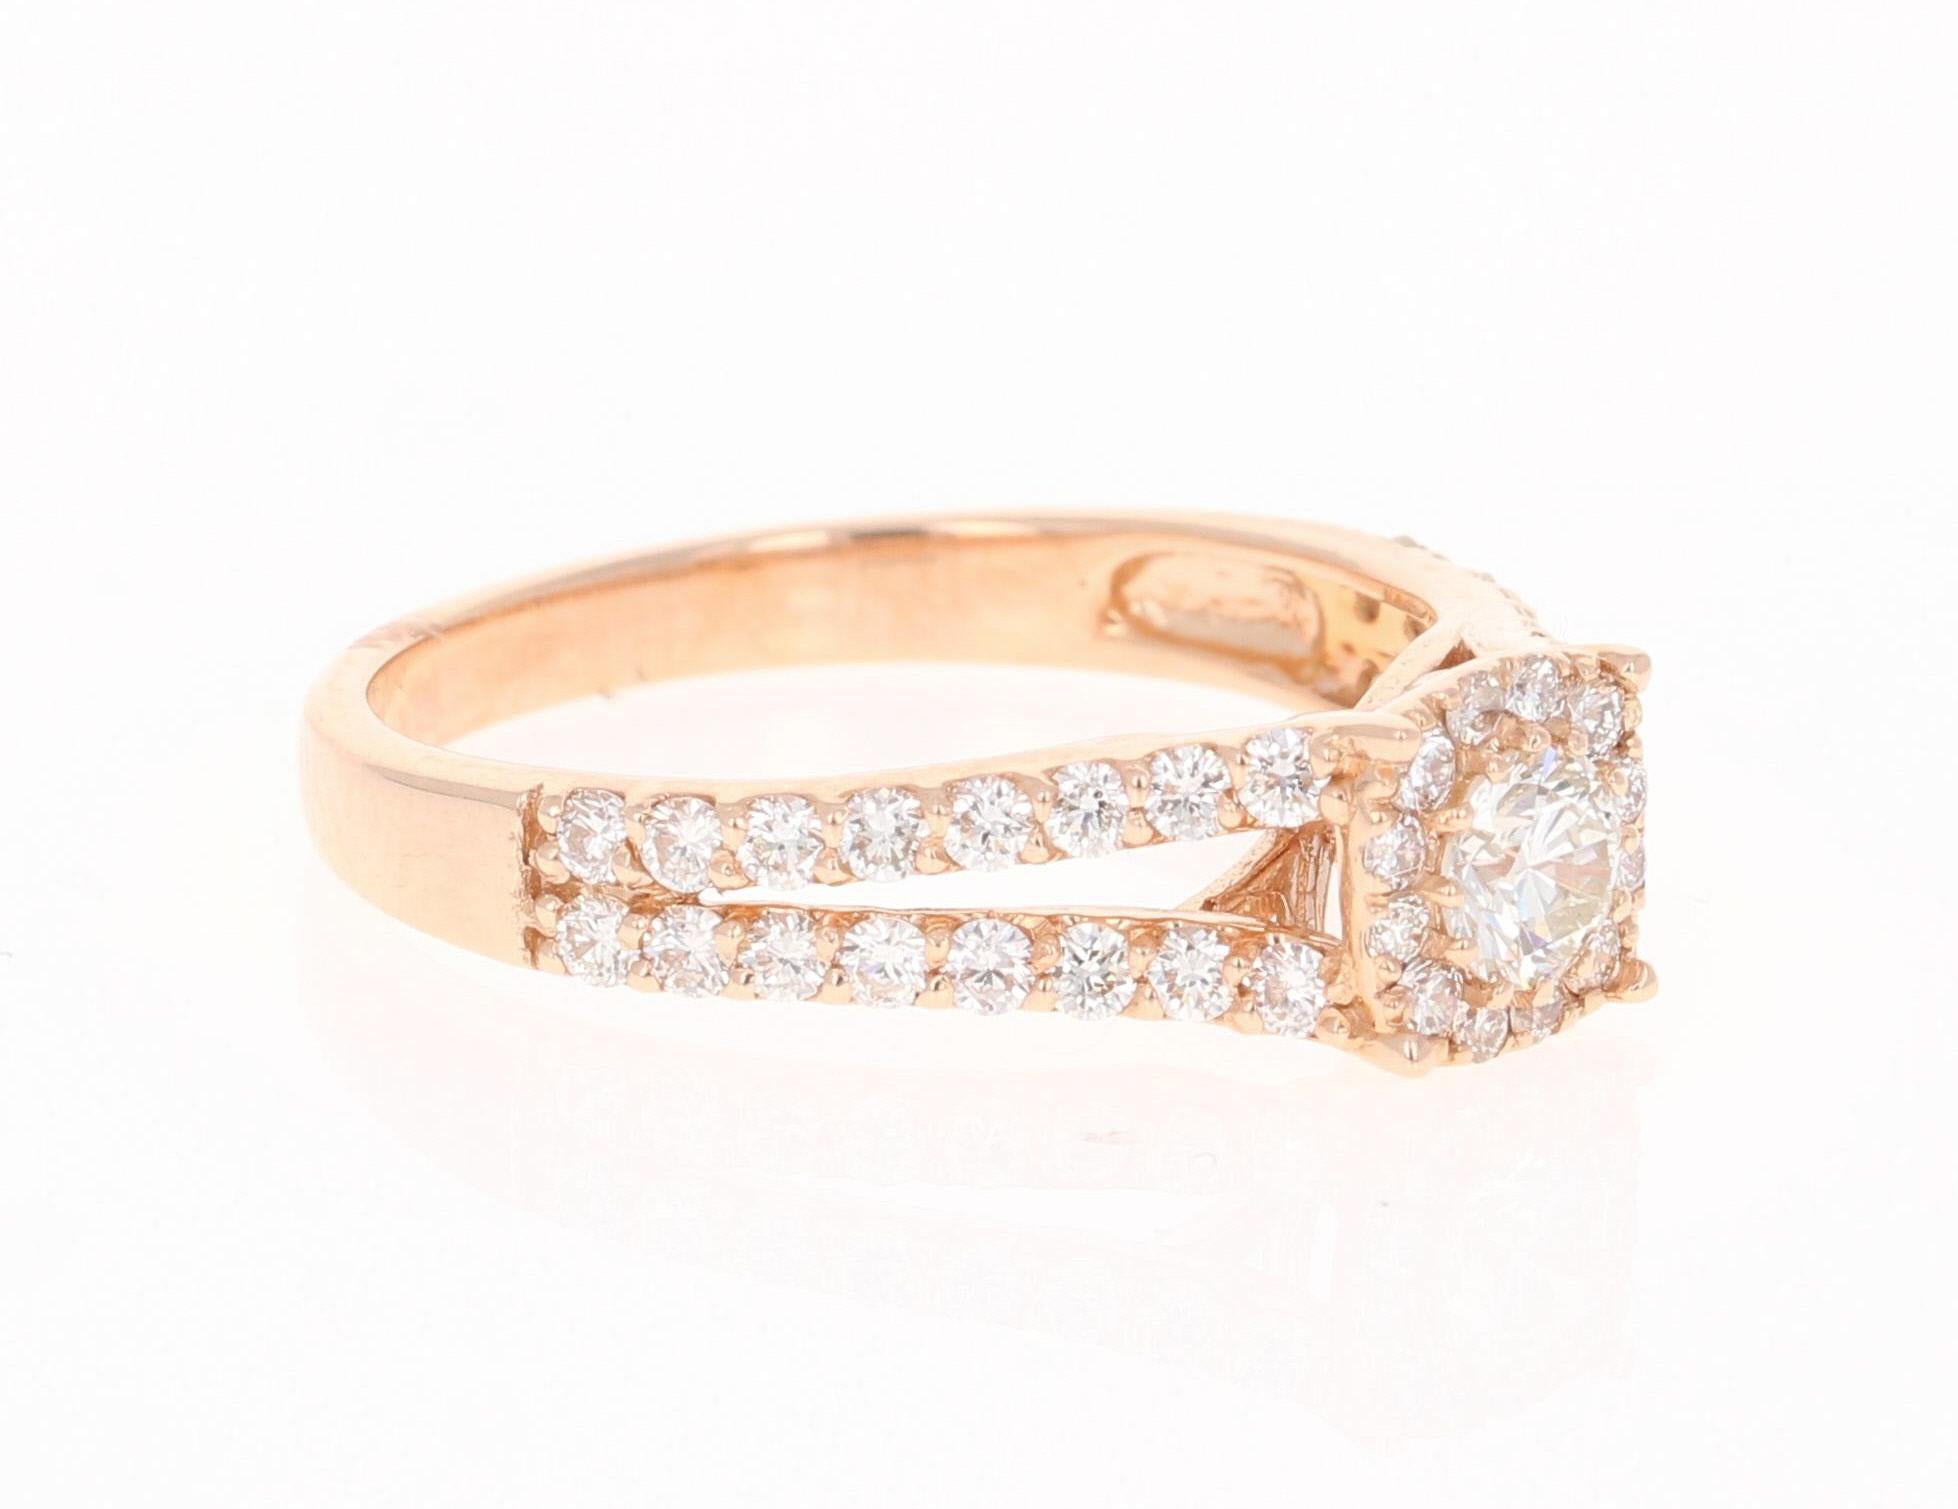 This unique Cluster ring has 45 Round Cut Diamonds that weigh 0.94 Carats.  The Cluster setting makes the center Diamond look well over a carat.   The Clarity is VS2 and the Color is H.

It is beautifully set in 14 Karat Rose Gold and weighs